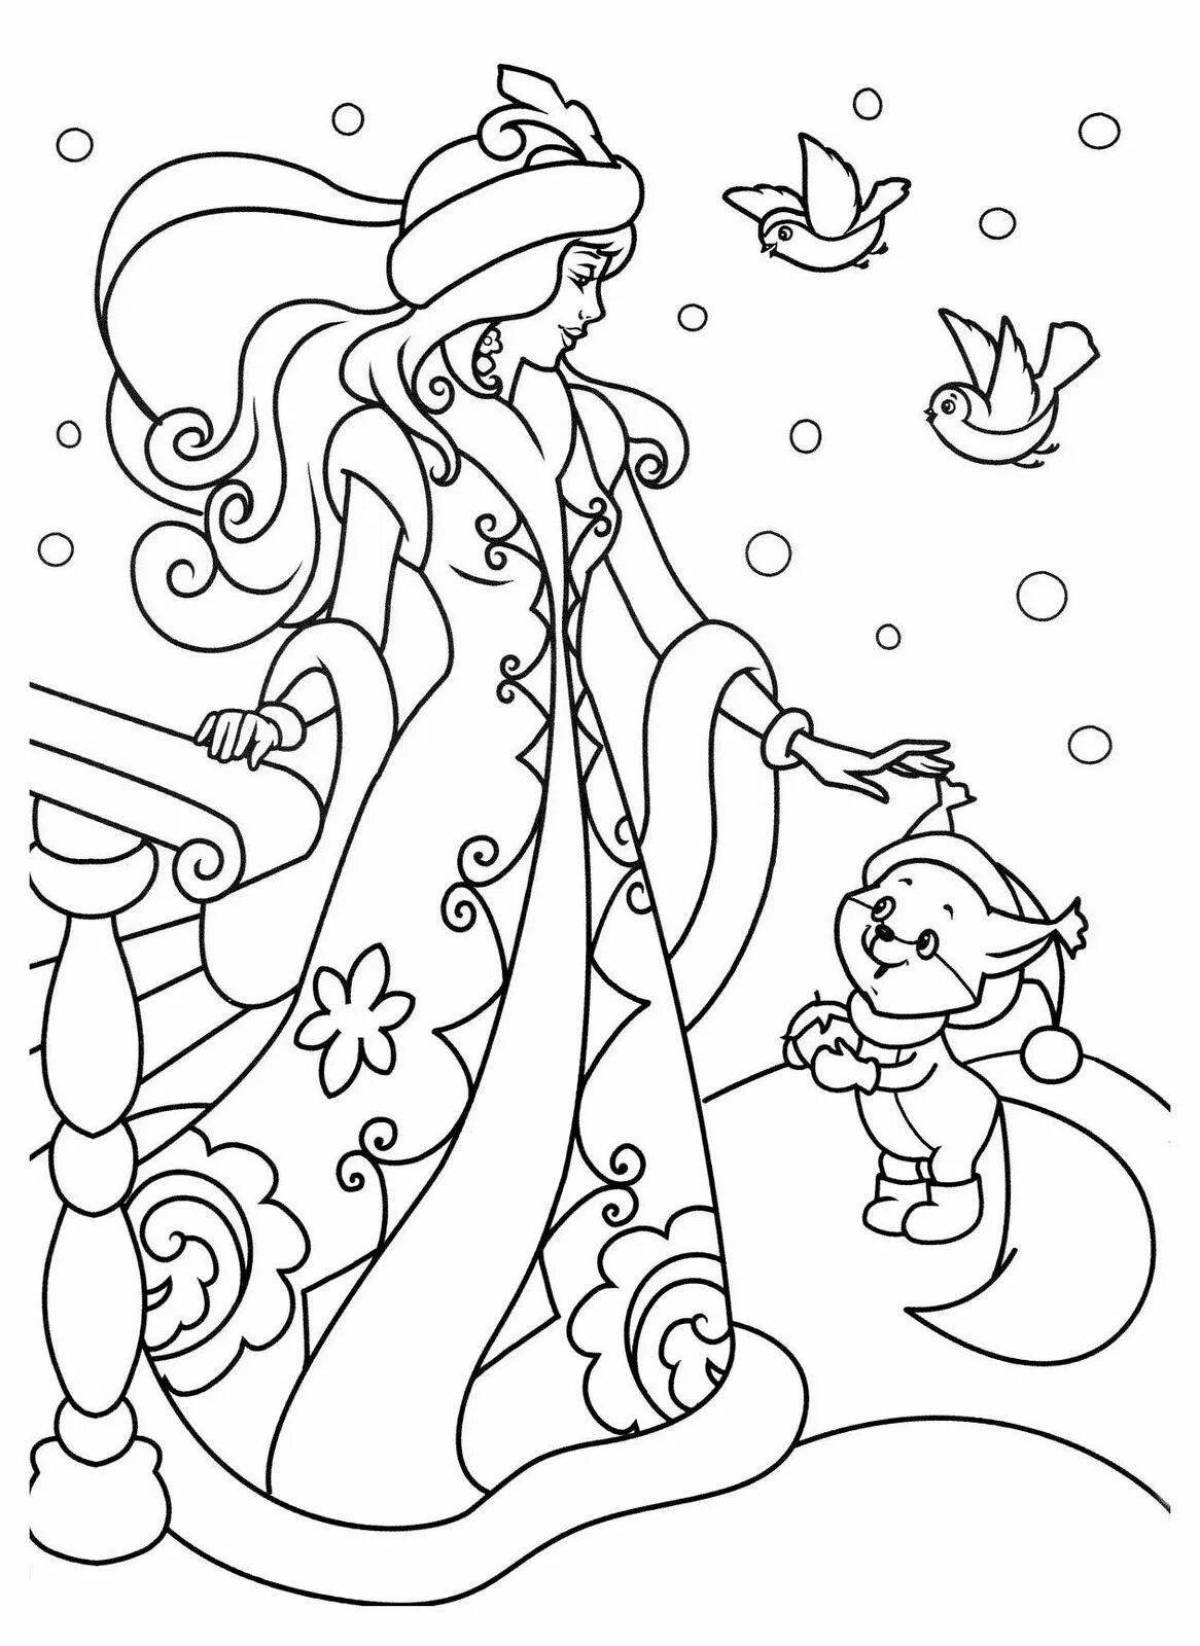 Dazzling snow maiden coloring book